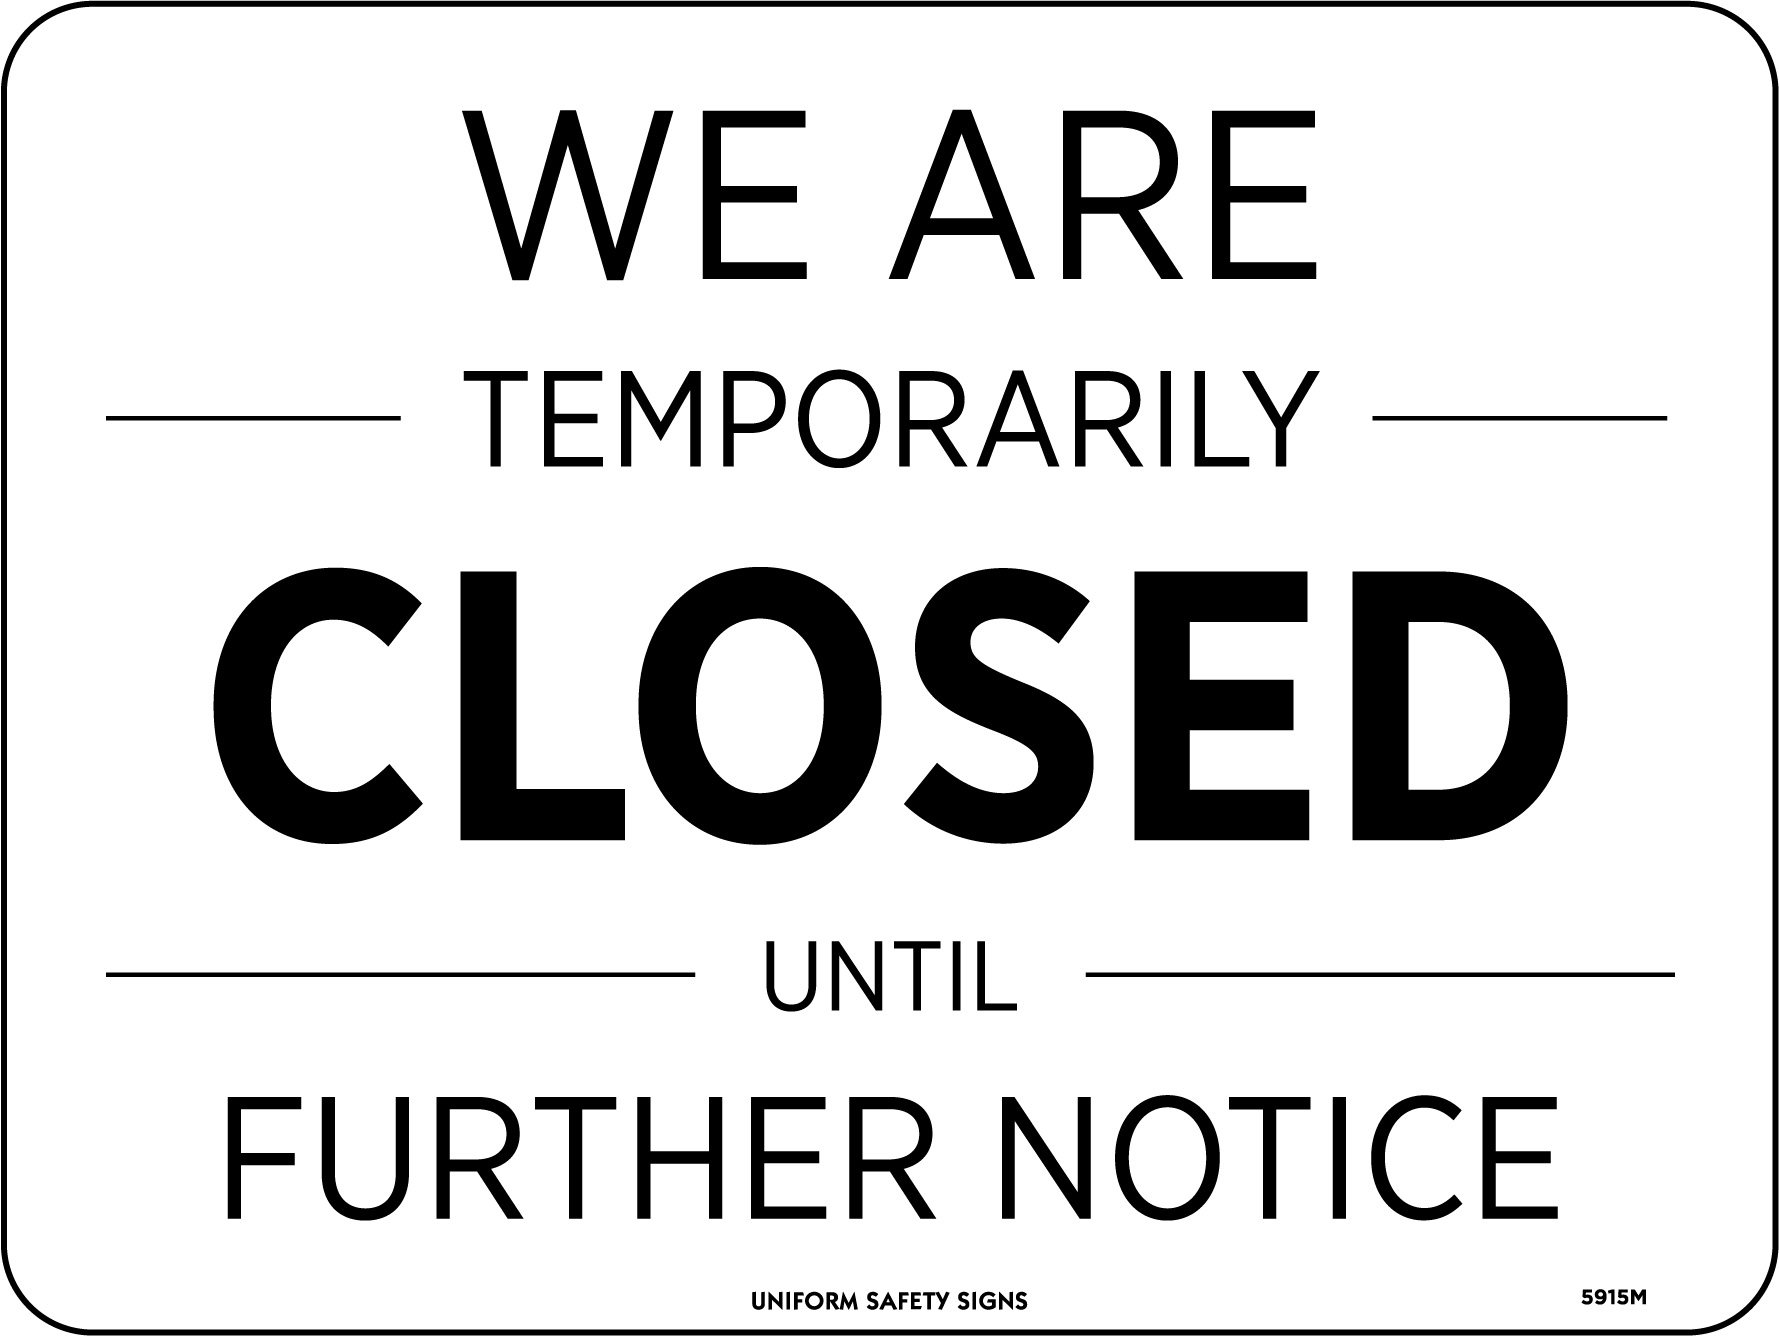 ＊(Wandschrank ac)Temporarily closed now.